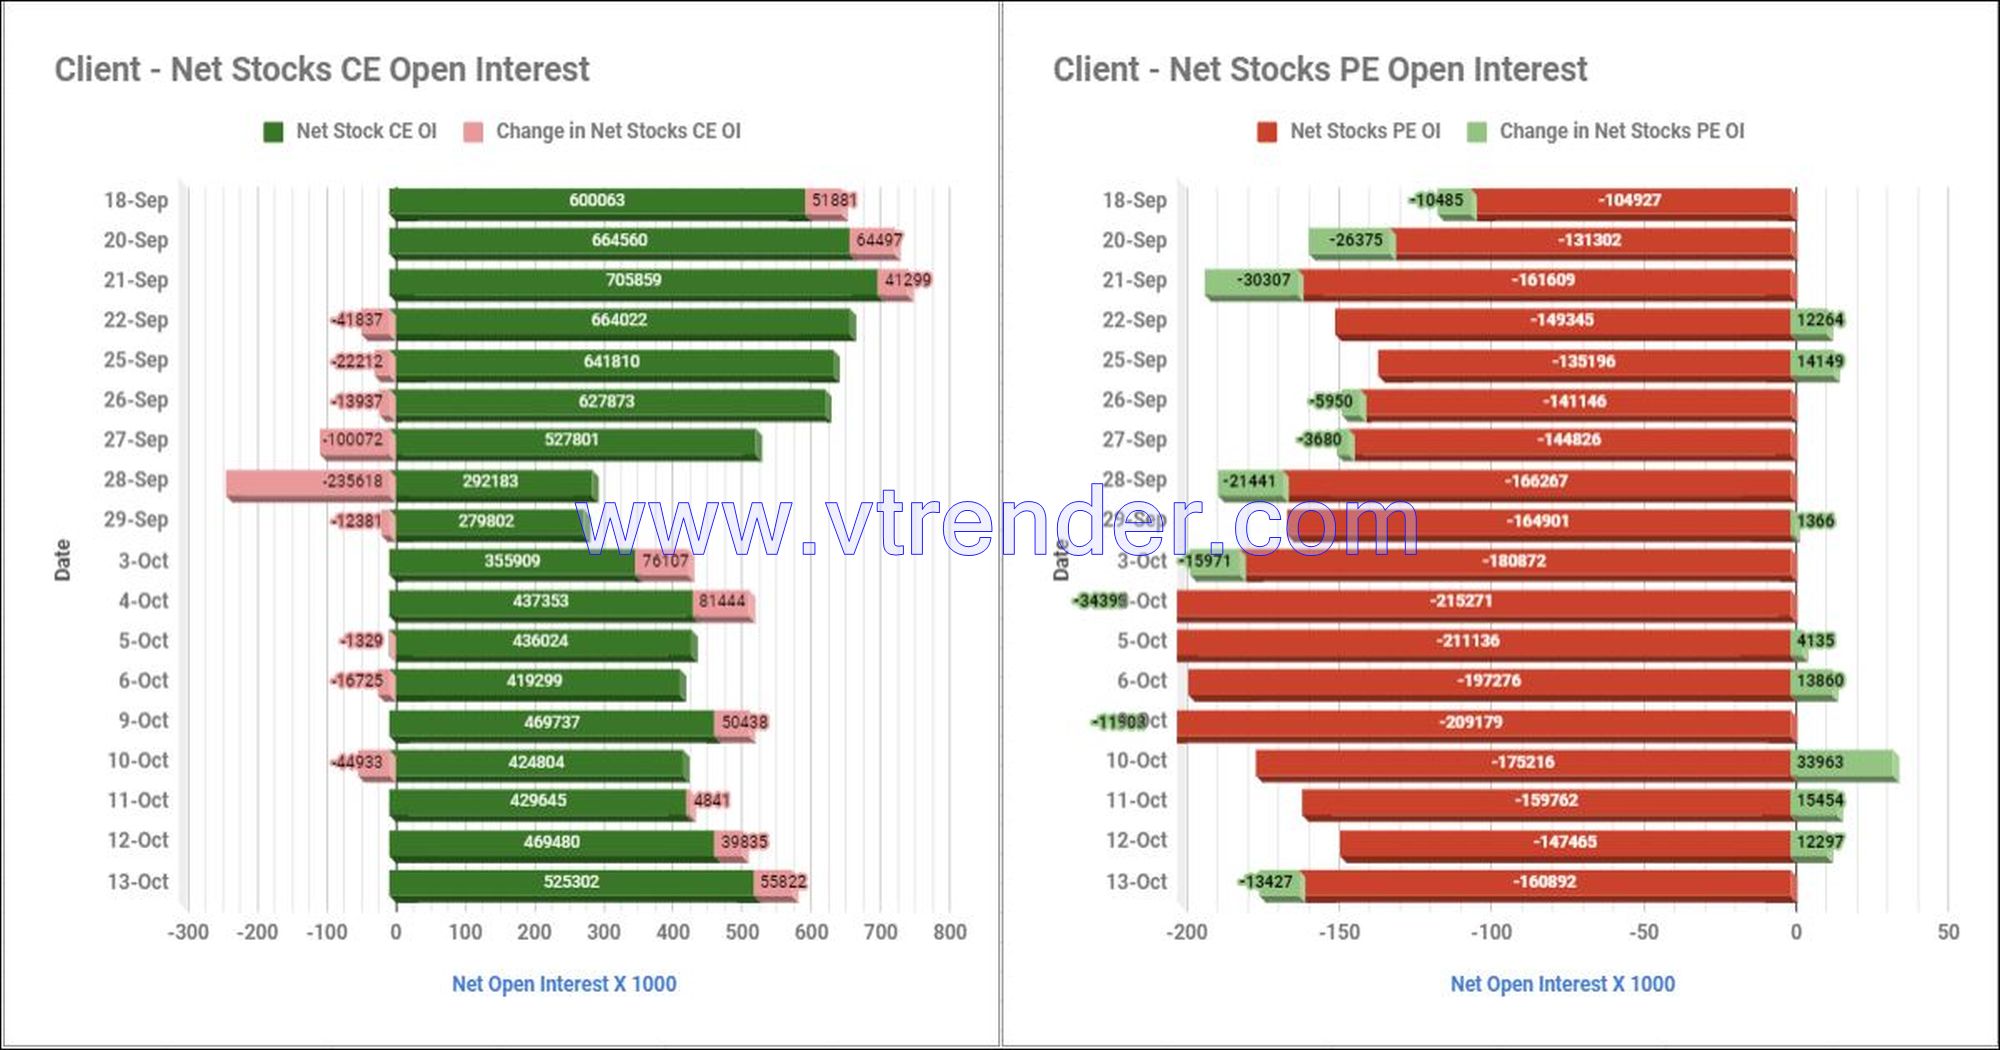 Clientstop13Oct Participantwise Net Open Interest And Net Equity Investments – 13Th Oct 2023 Ce, Client, Dii, Fii, Index Futures, Index Options, Open Interest, Pe, Prop, Stocks Futures